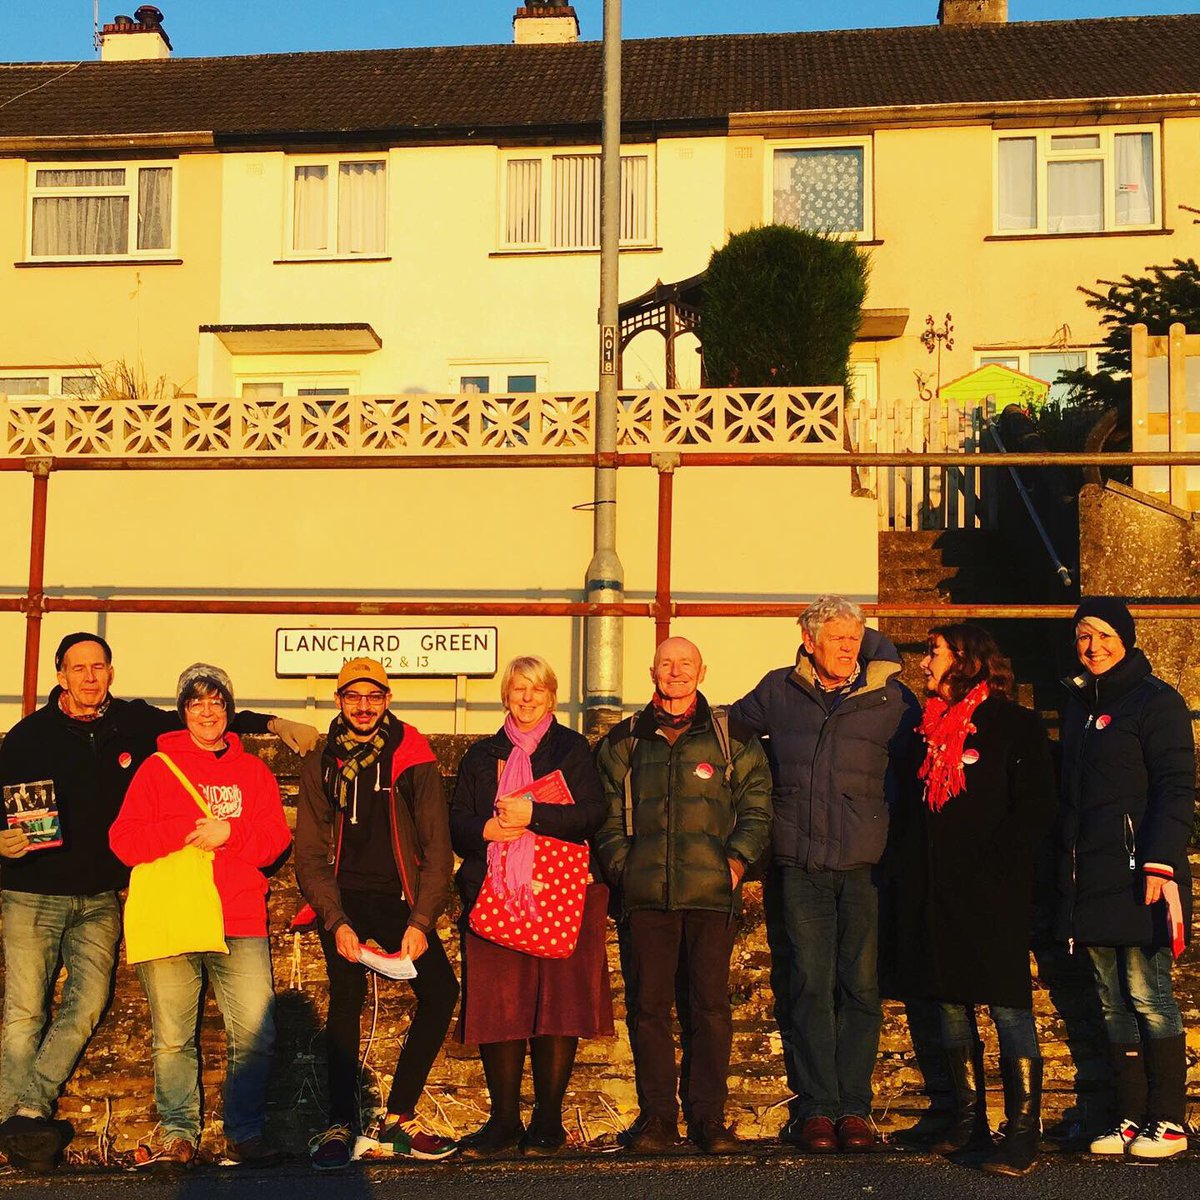 A beautiful winter day out on the #labourdoorstep with these beautiful people. 

#votelabour #corbyn4christmas #jc4pm #GE2019 #Liskeard #kernow #cornwall #LabourFamily #IAMLABOUR 

@jeremycorbyn @labour_sw